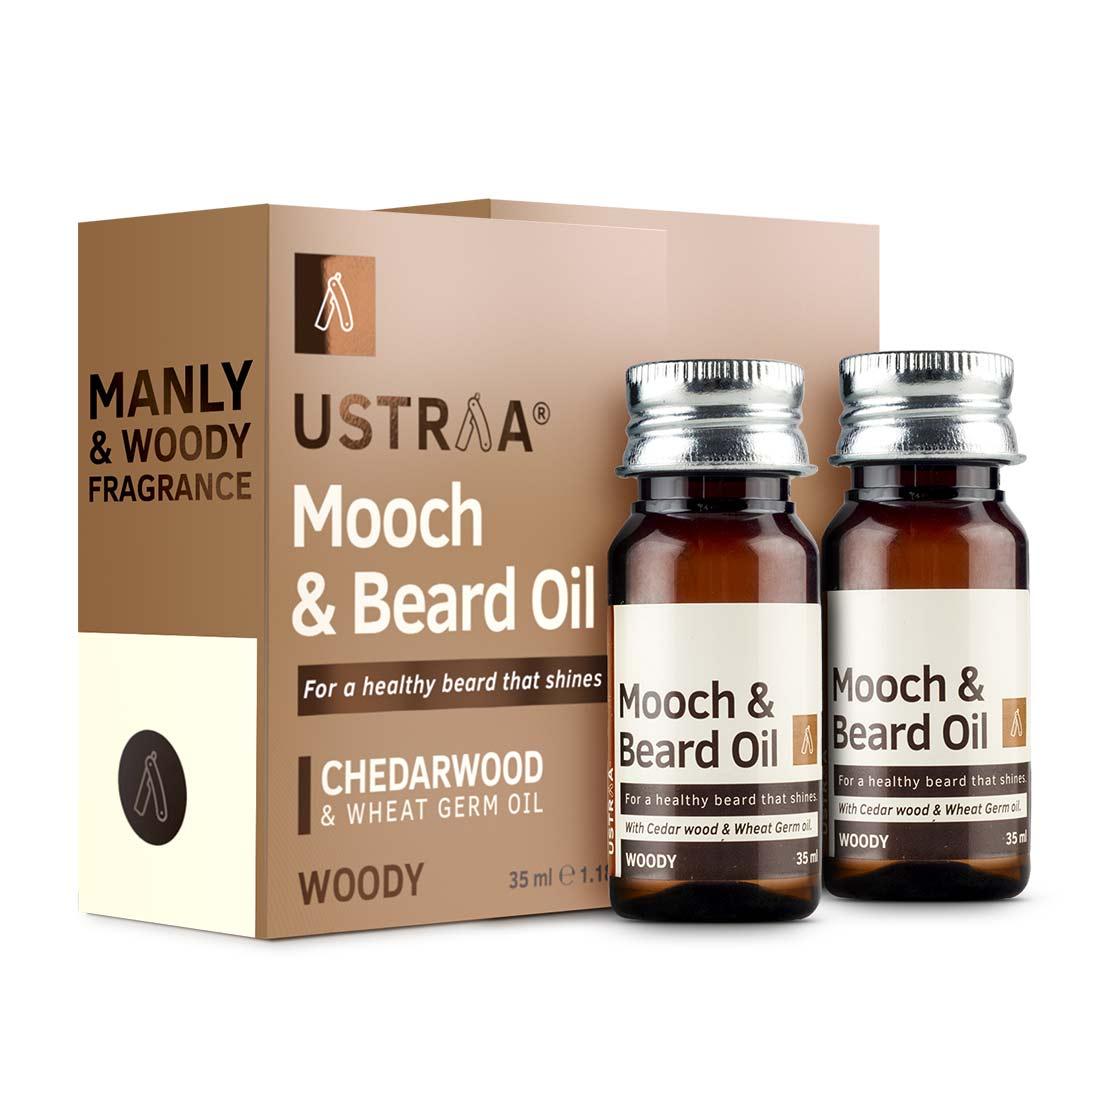 Mooch & Beard Oil (Woody) helps you in maintaining longer beard styles and makes your beard hair more shiny & healthy